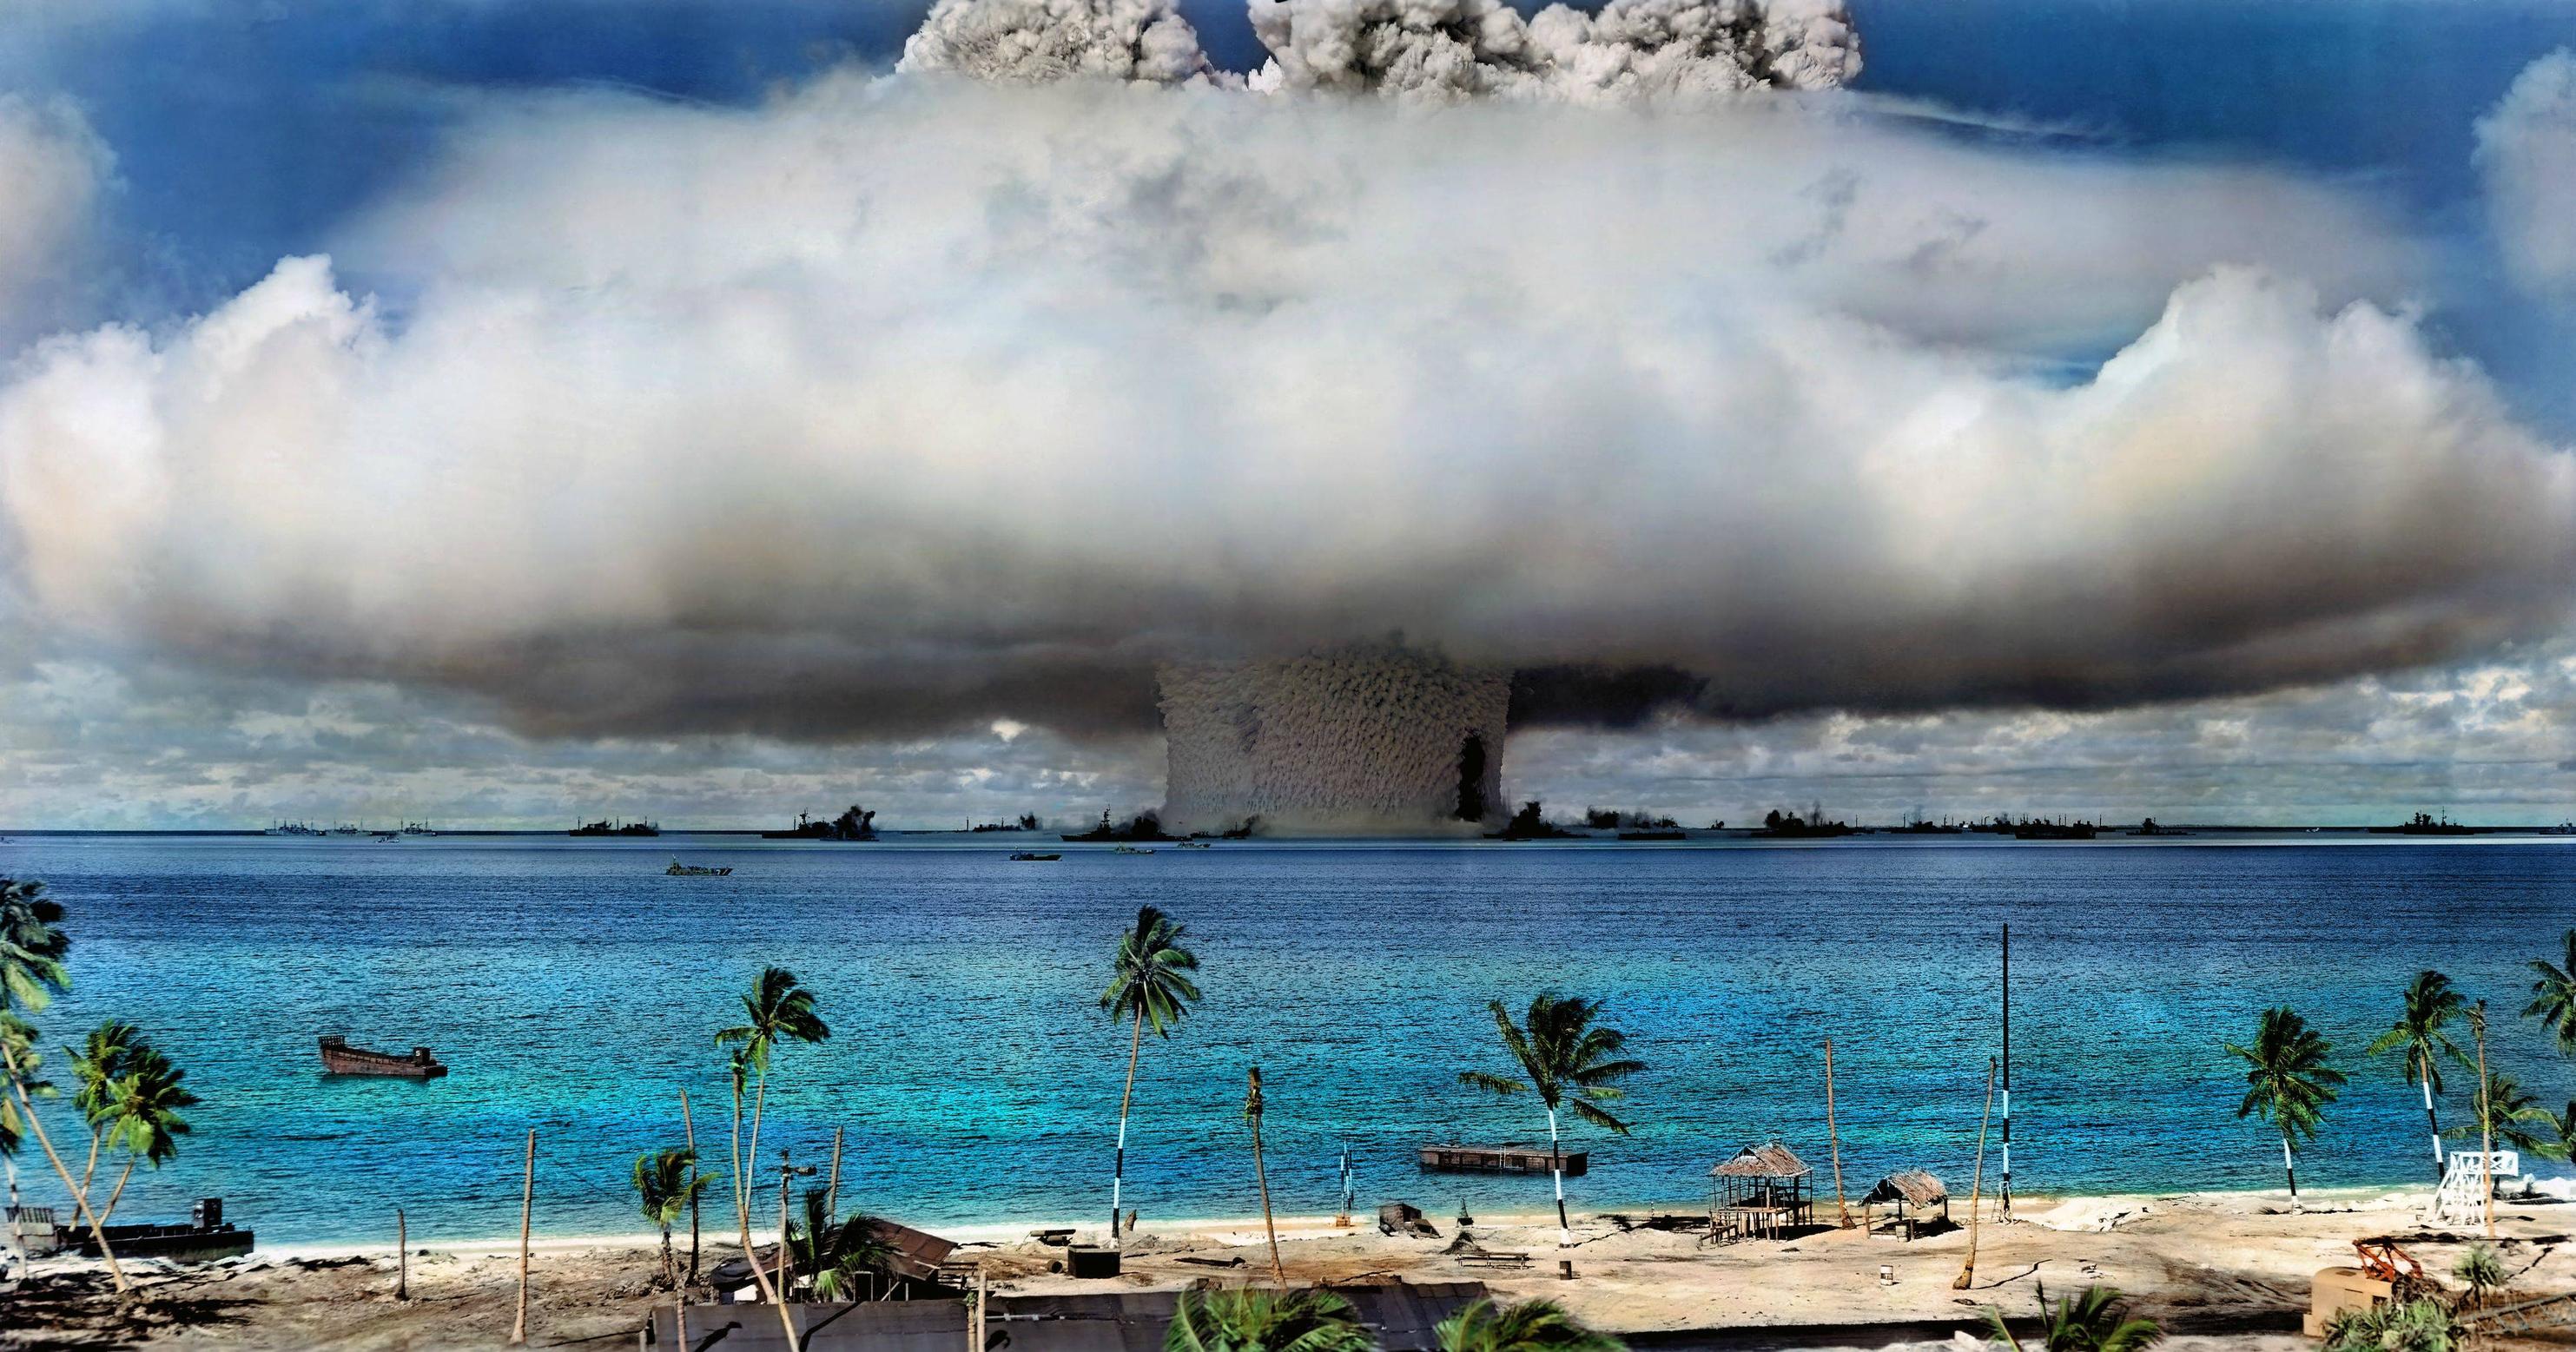 What You Should Know About Nuclear Weapons